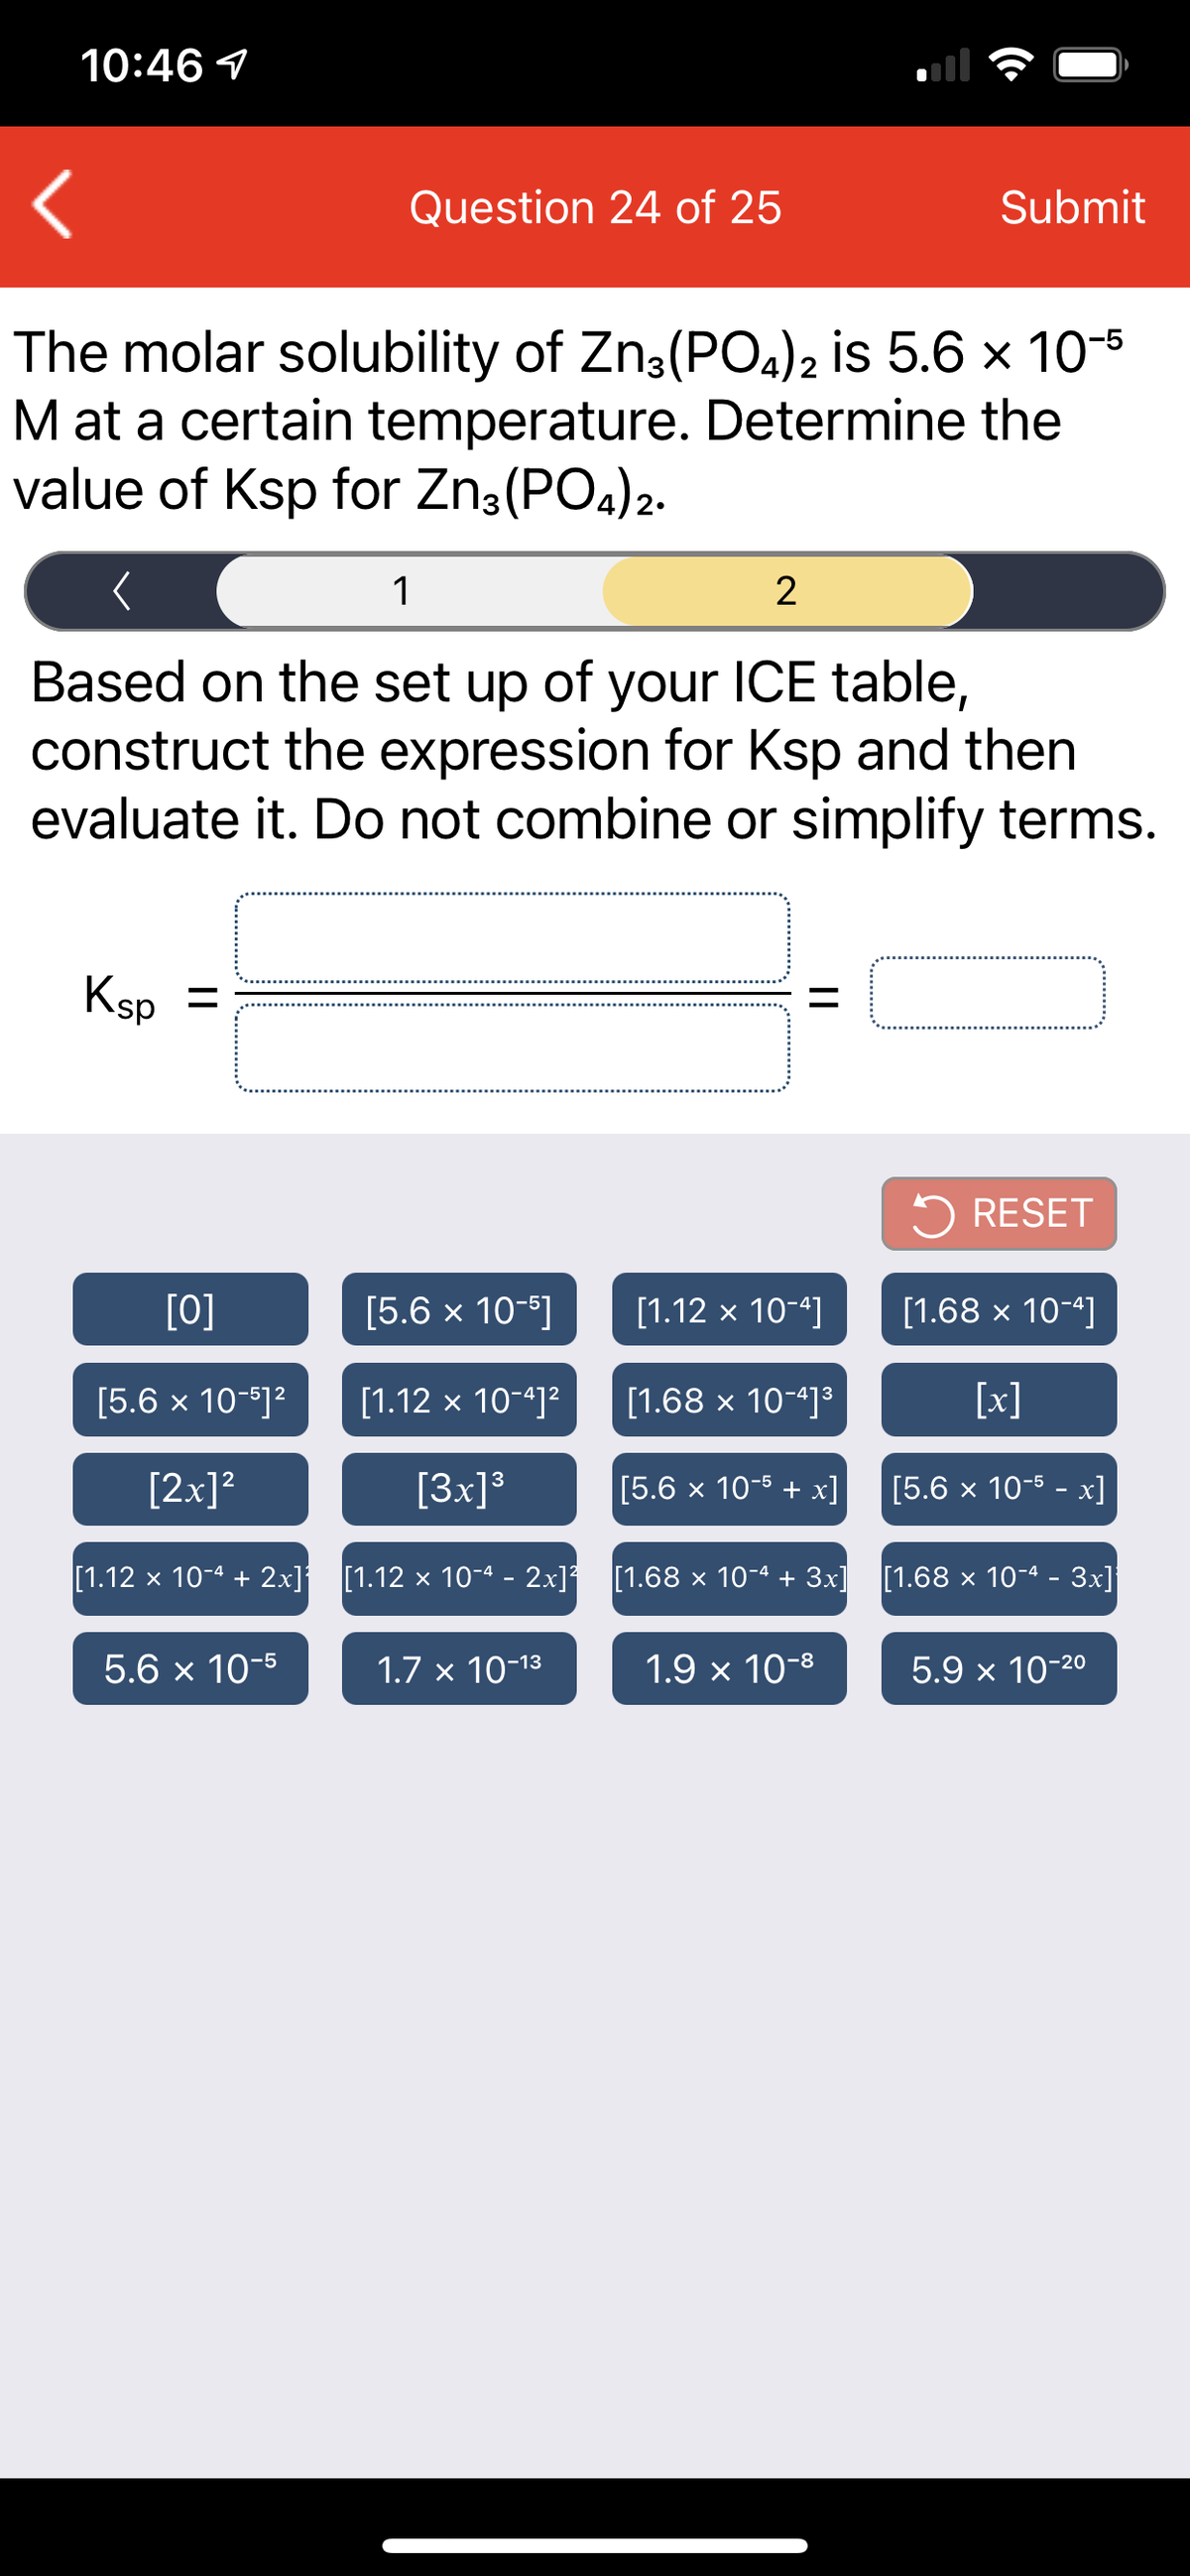 10:46 1
Question 24 of 25
Submit
The molar solubility of Zn3(PO4)2 is 5.6 x 10-5
M at a certain temperature. Determine the
value of Ksp for Zn3(PO4)2.
1
2
Based on the set up of your ICE table,
construct the expression for Ksp and then
evaluate it. Do not combine or simplify terms.
Ksp =
%3D
5 RESET
[0]
[5.6 x 10-]
[1.12 x 10-4]
[1.68 x 10-4]
[5.6 x 10-5]?
[1.12 x 10-4]?
[1.68 x 10-4]³
[x]
[2x]?
[3x]°
[5.6 x 10-5 + х]
[5.6 х 10-5 - х]
[1.12 x 10-4 + 2x] [1.12 x 10-4 - 2x] [1.68 × 10-4 + 3x] [1.68 × 10-4 - 3x]
5.6 x 10-5
1.7 x 10-13
1.9 x 10-8
5.9 x 10-20
